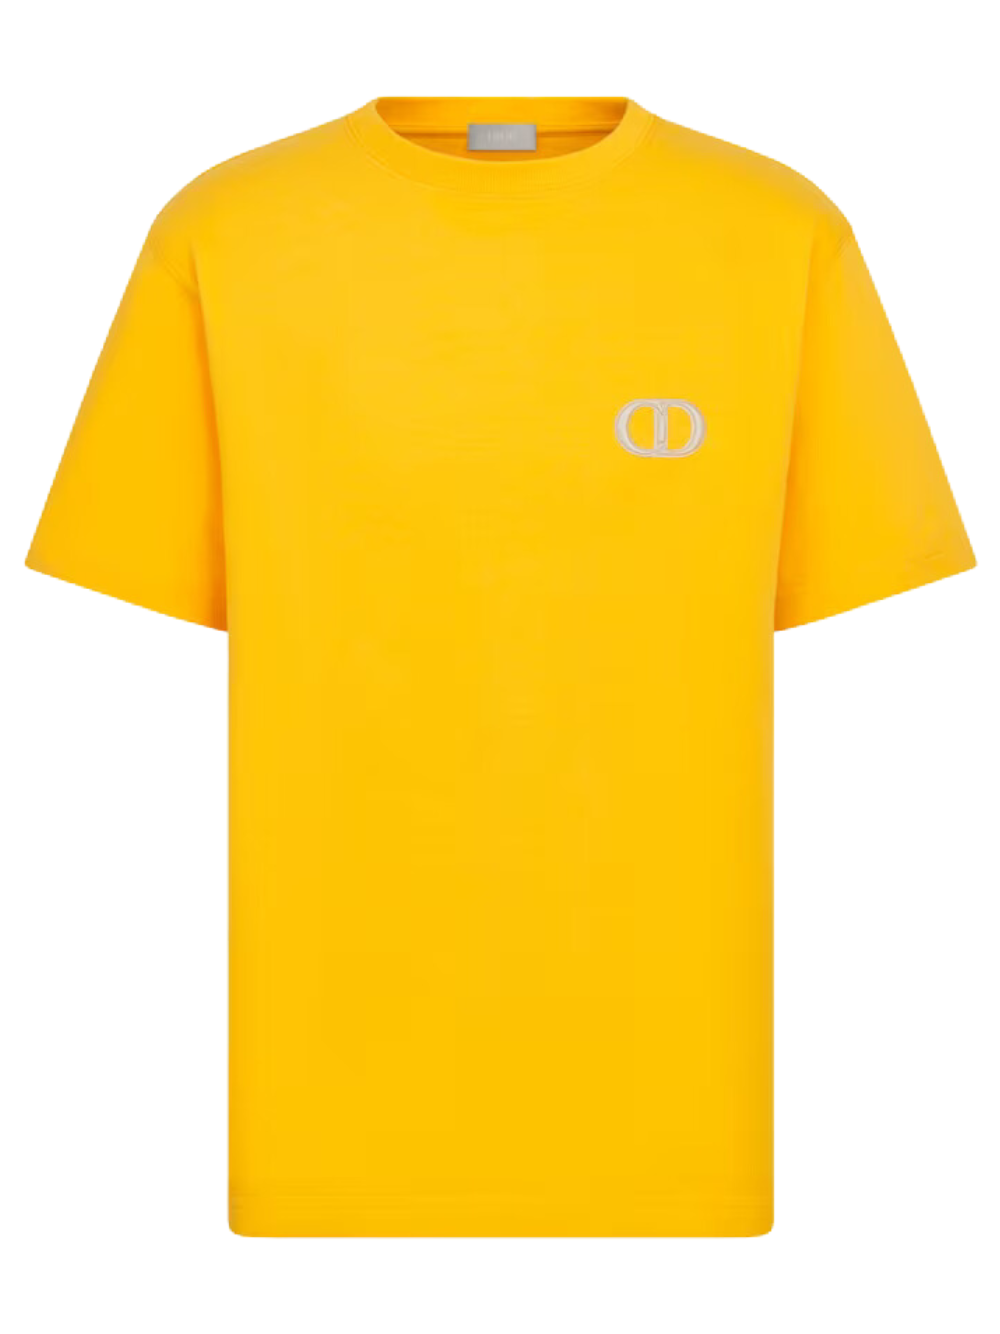 Dior CD Icon Yellow T-Shirt Relaxed Fit 943J605A0554_C281